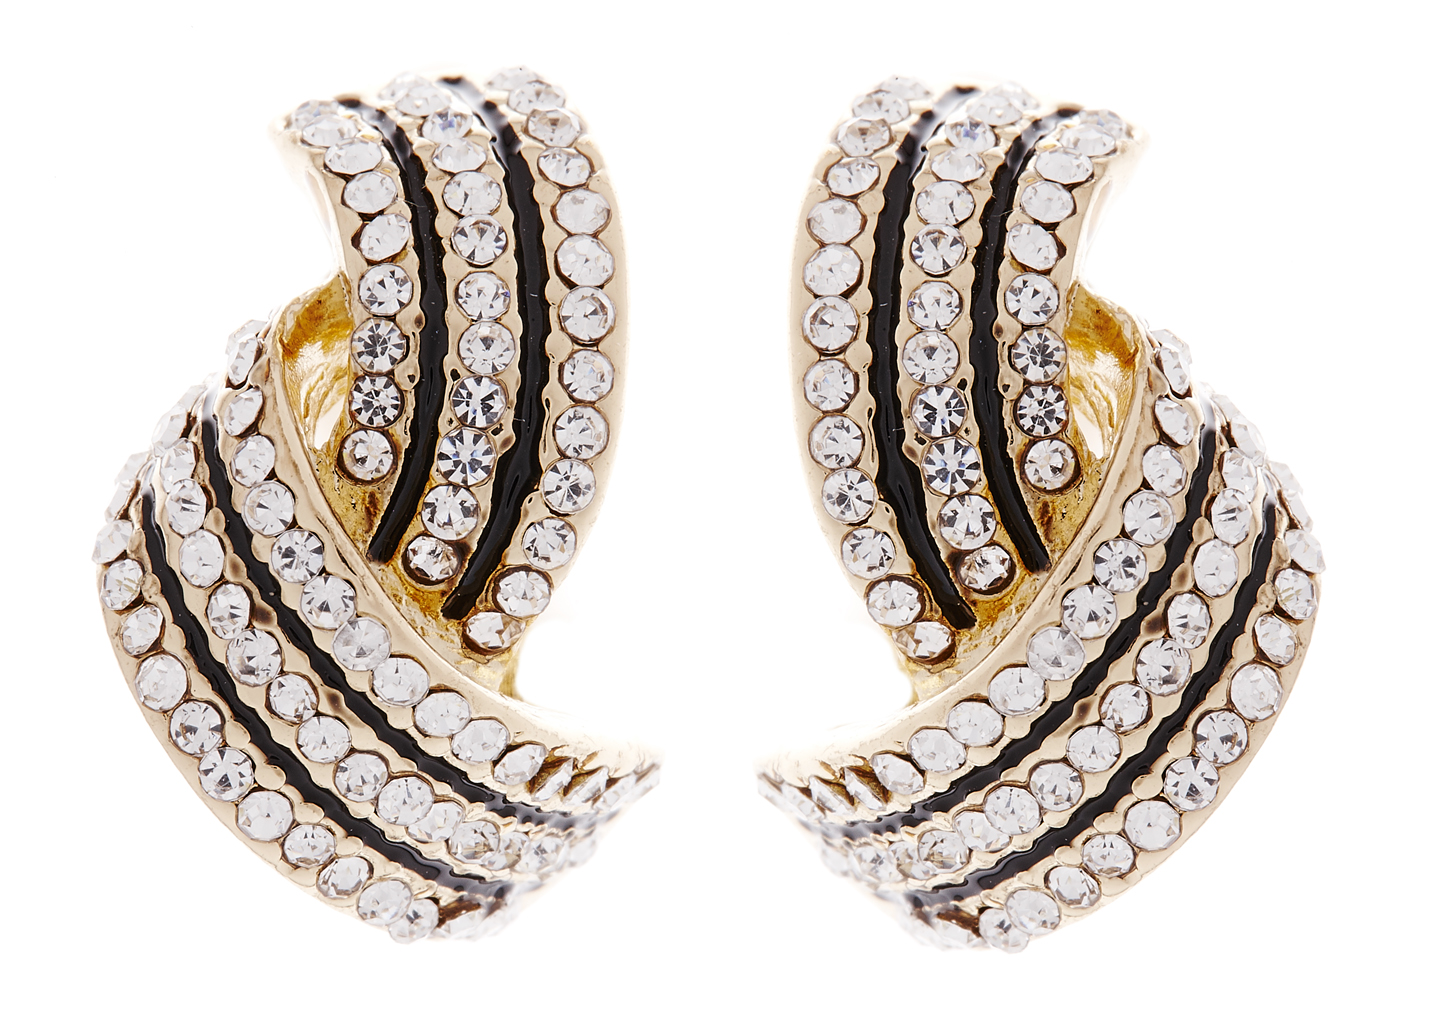 Clip on earrings - Camila - gold earring with clear crystals and black enamel